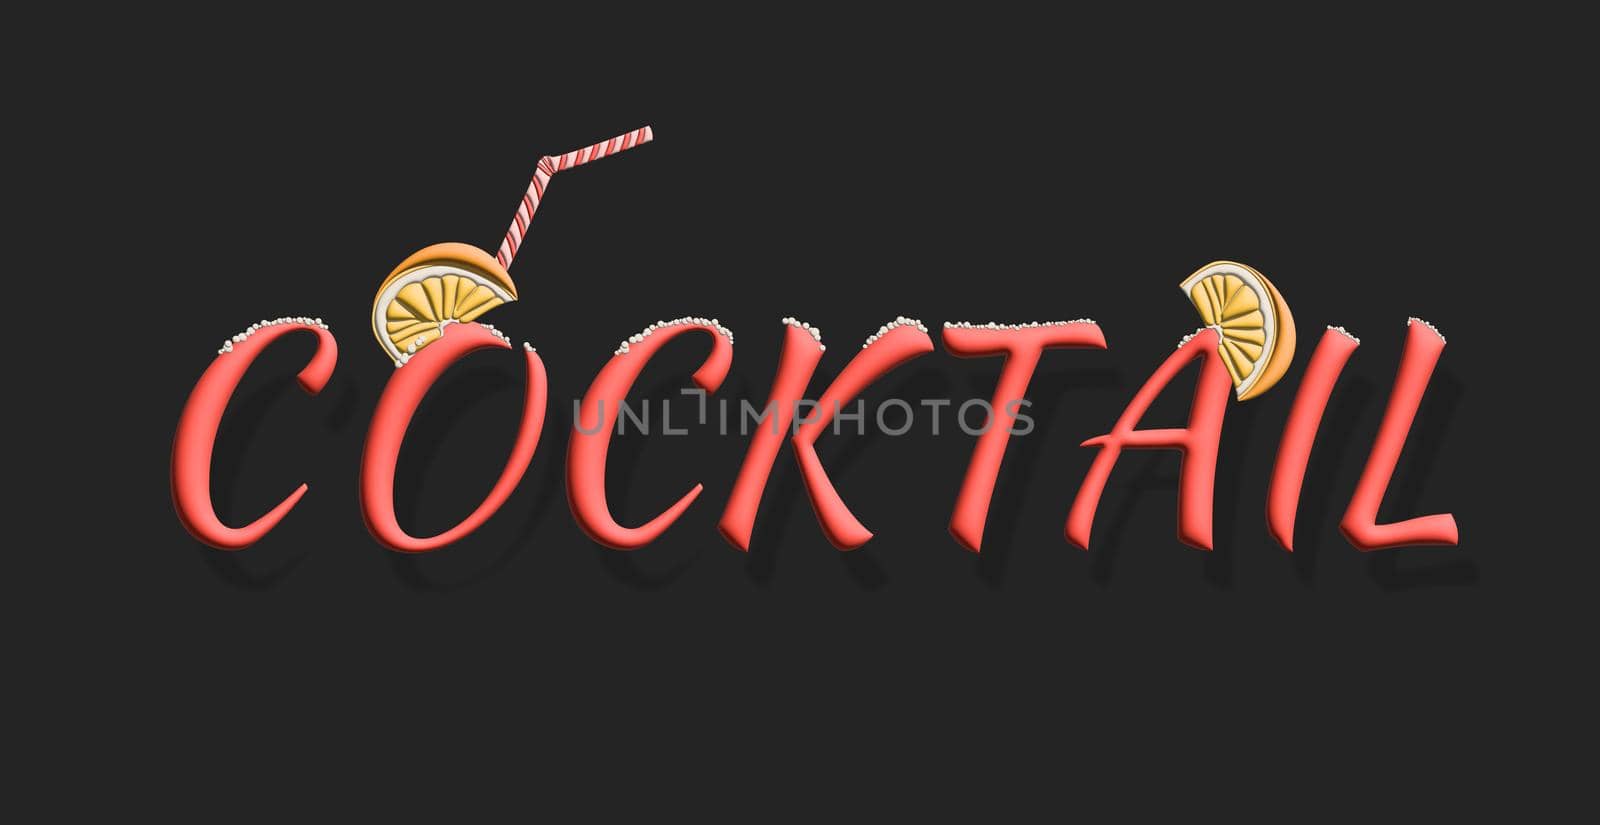 Stylized text COCKTAIL. Stylish design for a brand, label or advertisement